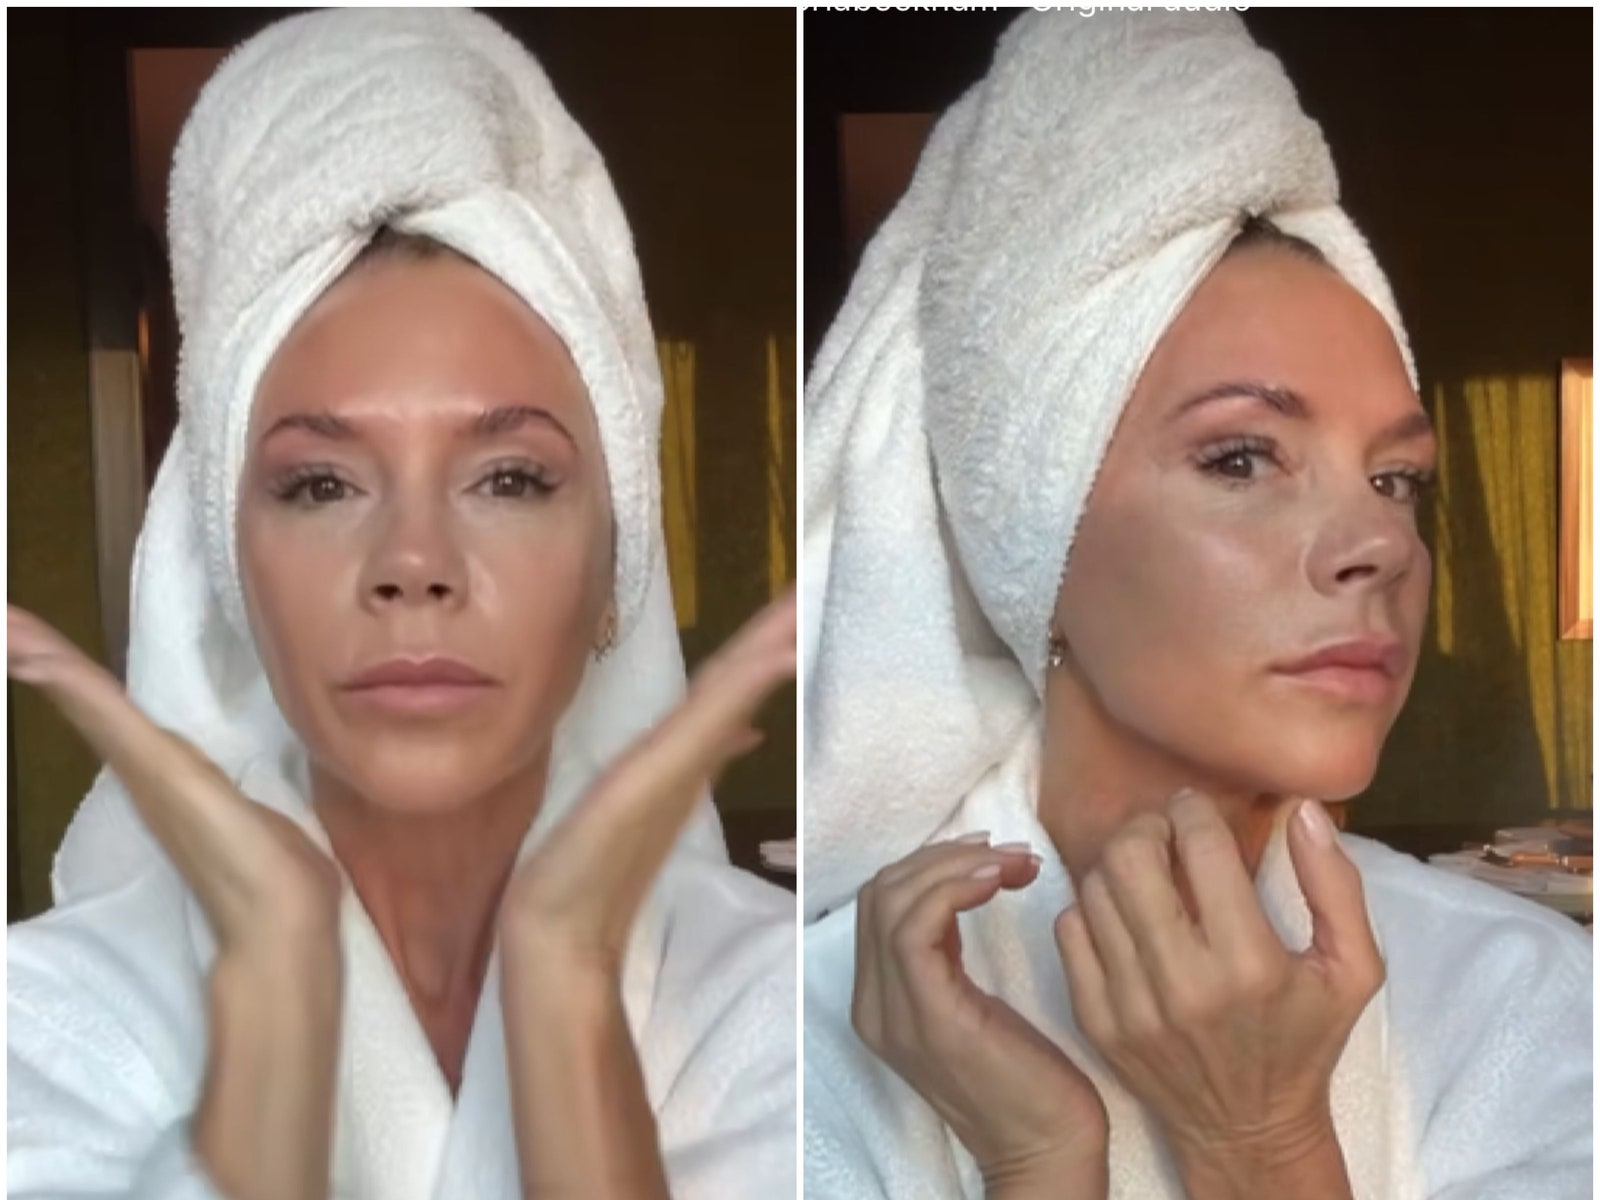 Victoria Beckham Wore ‘No Makeup’ to Show Off Her Two-Step Morning Skin Care Routine